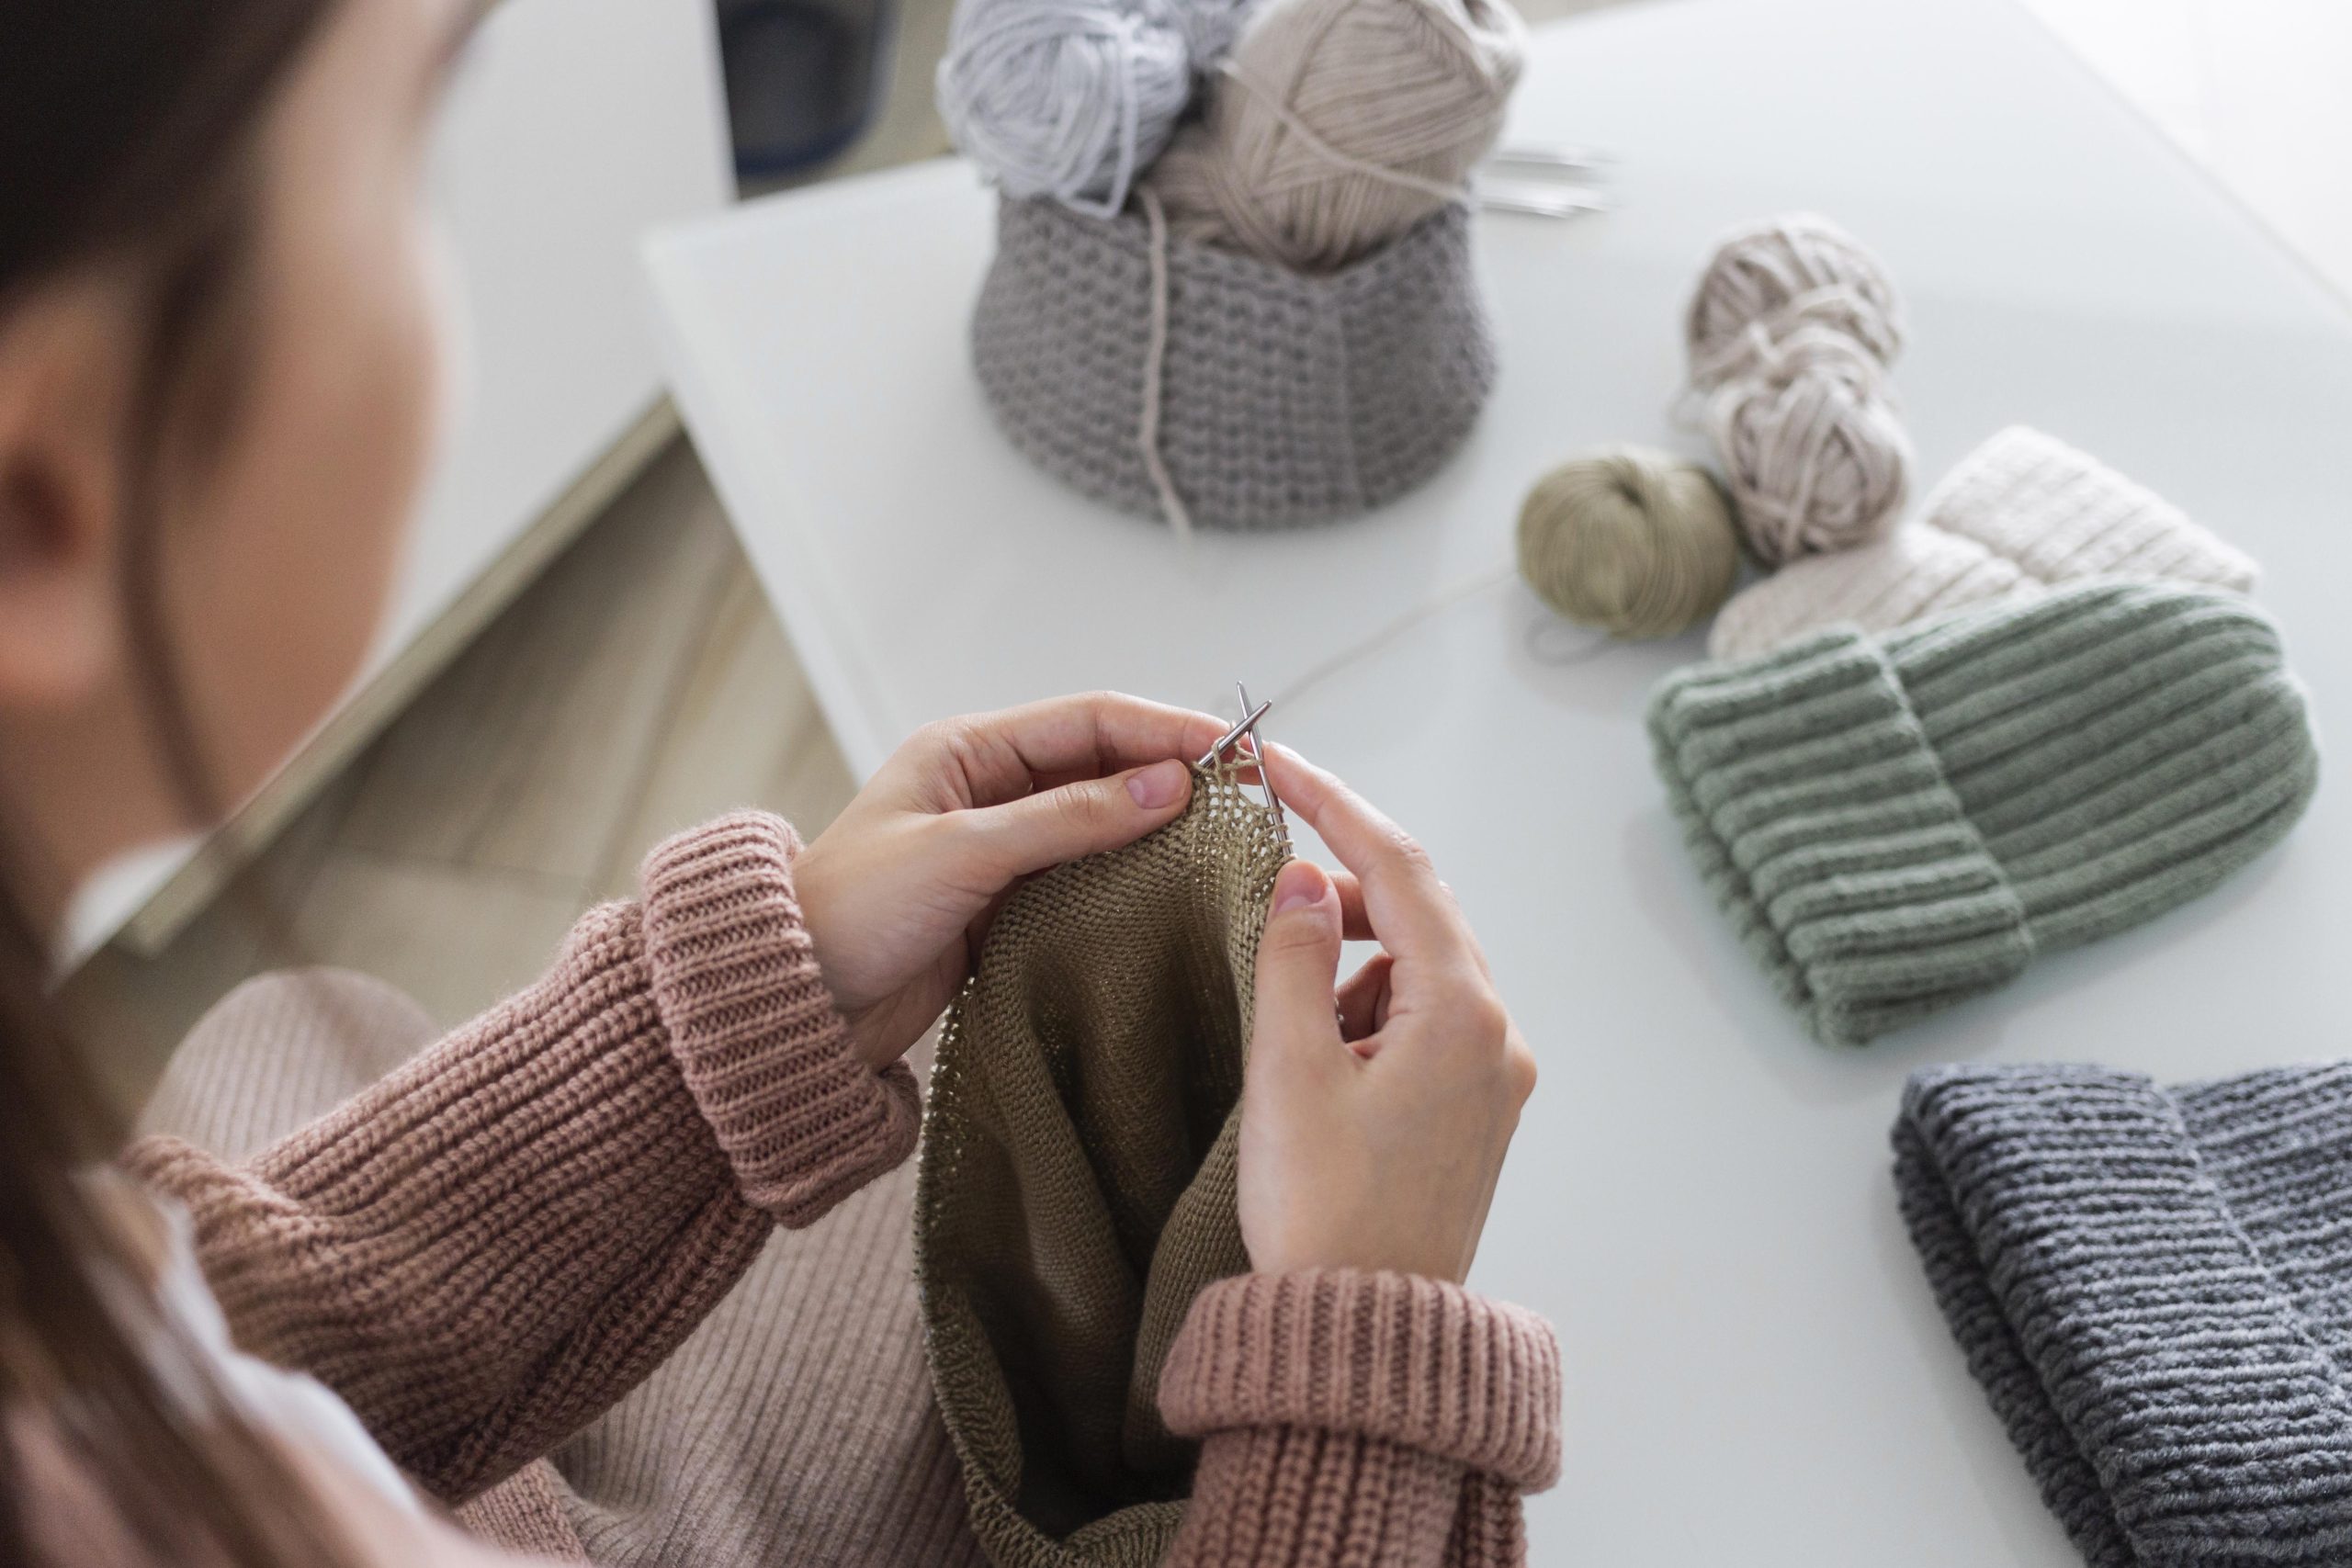 How to Make Your Own Knit Fabric at Home: DIY Techniques"